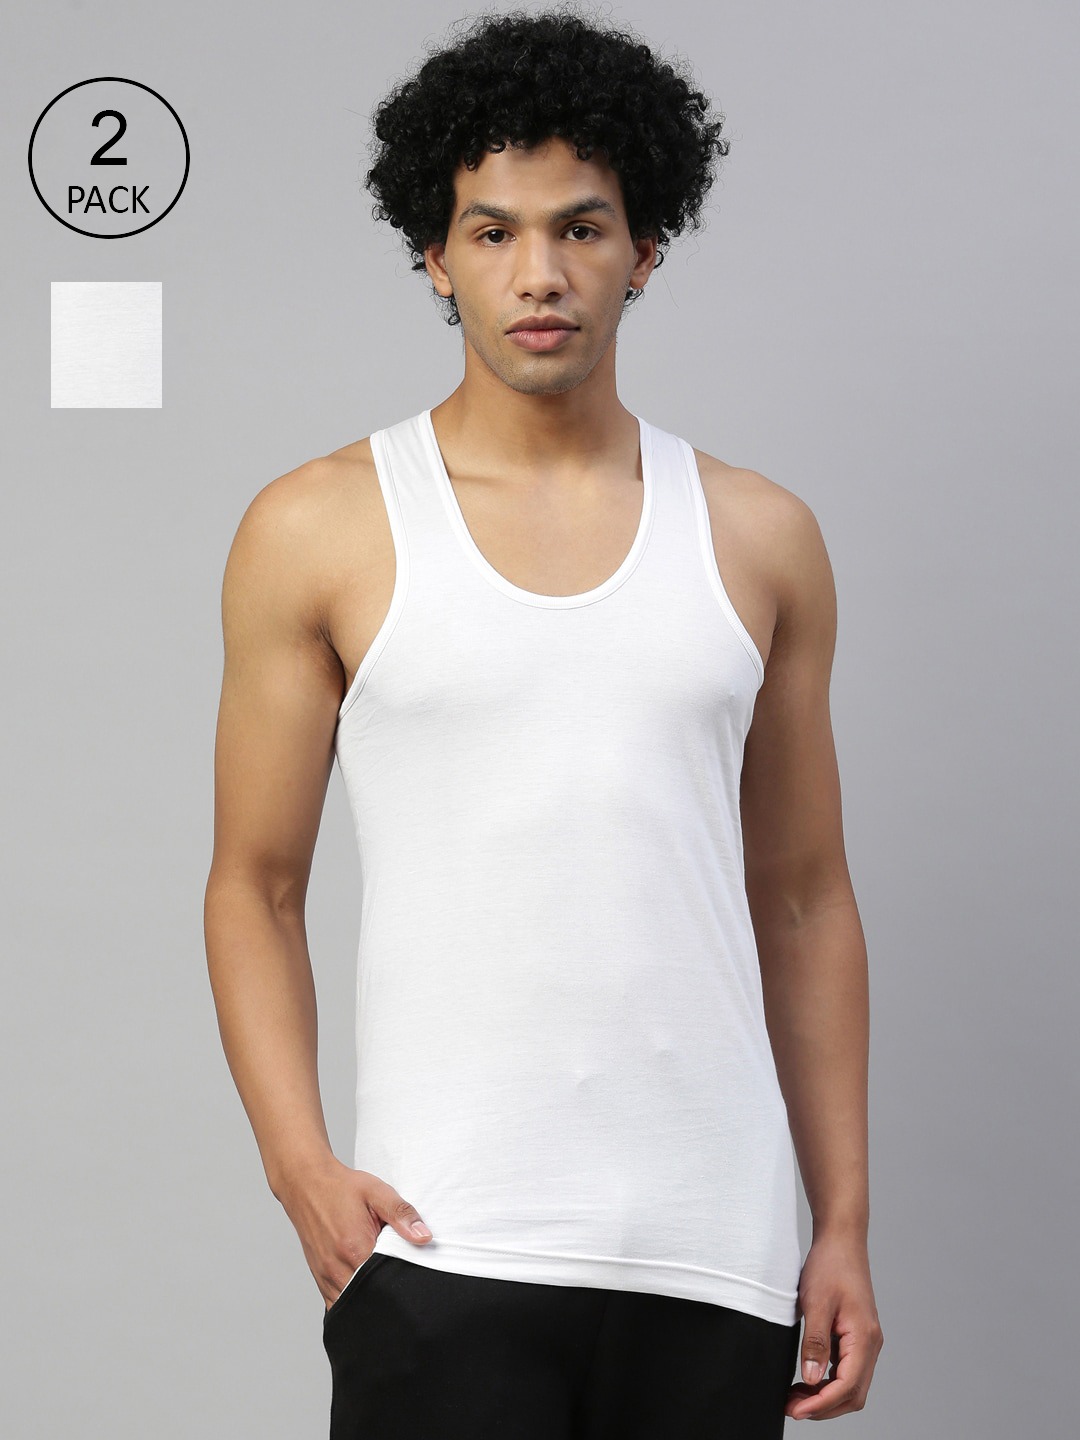 Clothing Innerwear Vests | DIXCY SCOTT MAXIMUS Men Pack Of 2 White Pure Cotton Gym Vest - CP85349